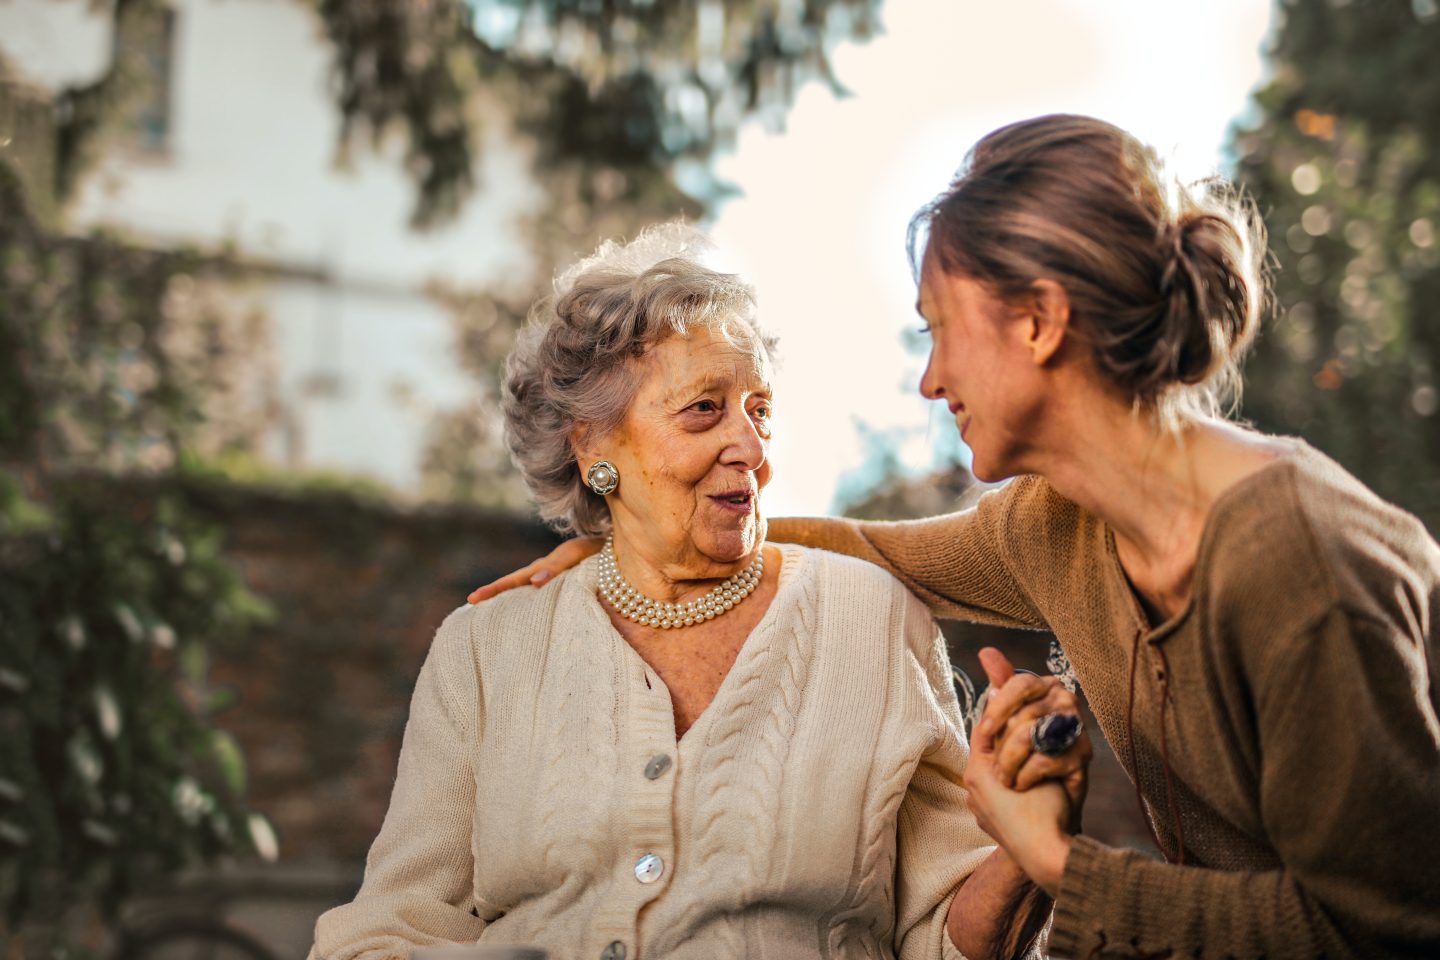 5 Little Ways You Can Help Out Your Aging Parents Today